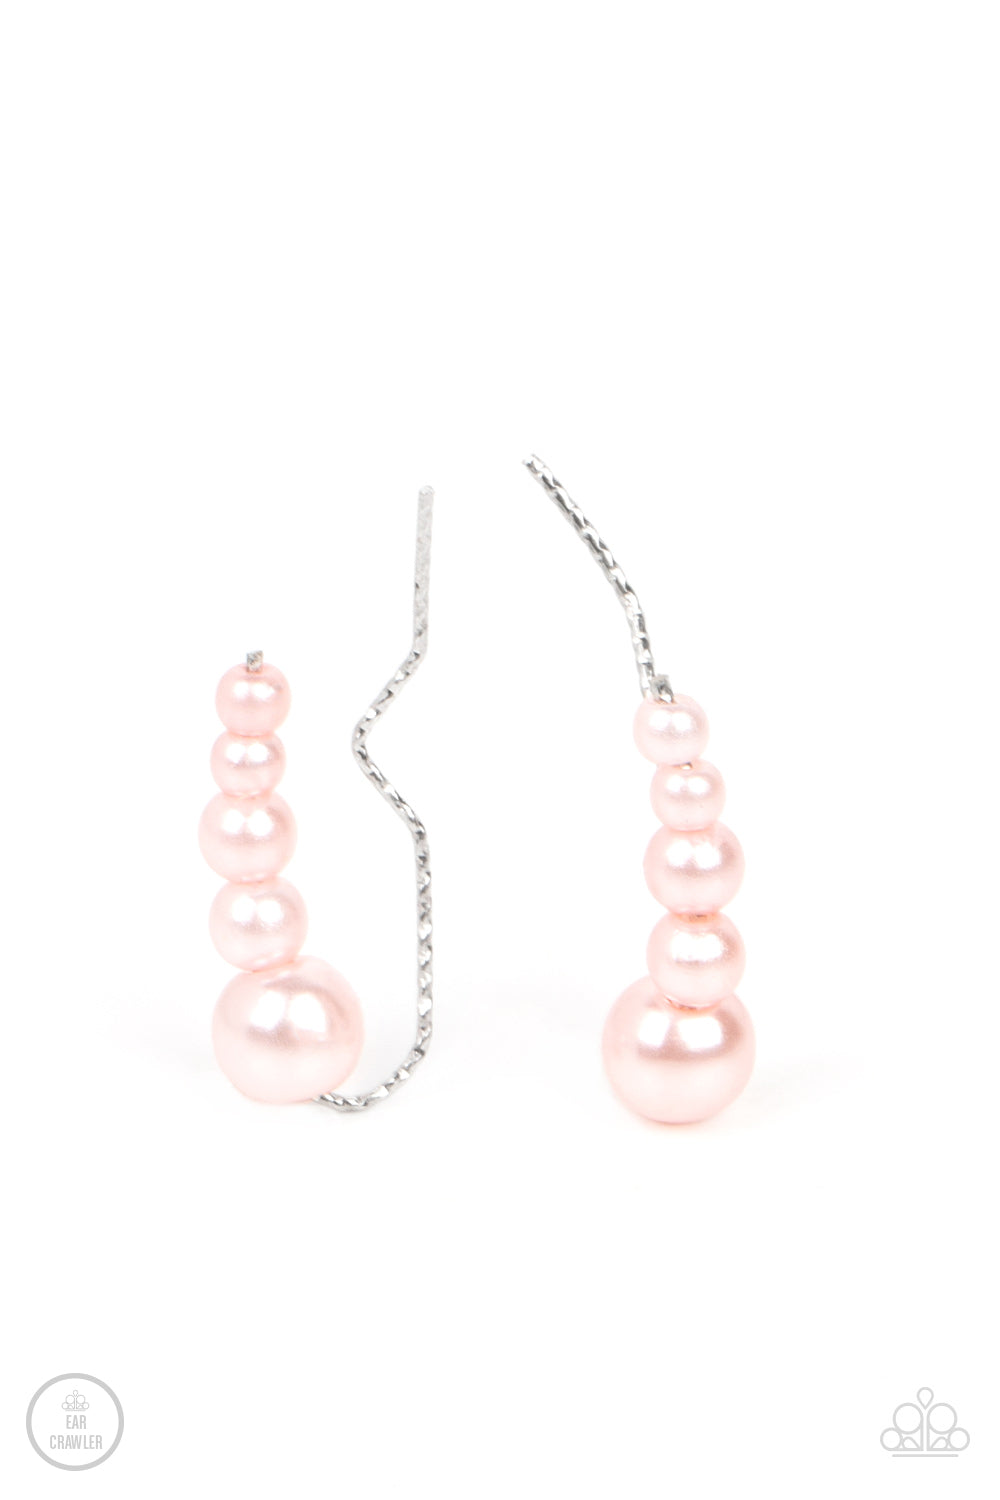 Paparazzi Accessories - Dropping into Divine - Pink Pearl Ear Crawler a bubbly cluster of dainty pink pearls decrease in size as they climb the ear, curving into an effervescent accent. Features an extended post fitting that climbs the back of the ear and can be pressed together for a more secure fit.  Sold as one pair of ear crawlers.